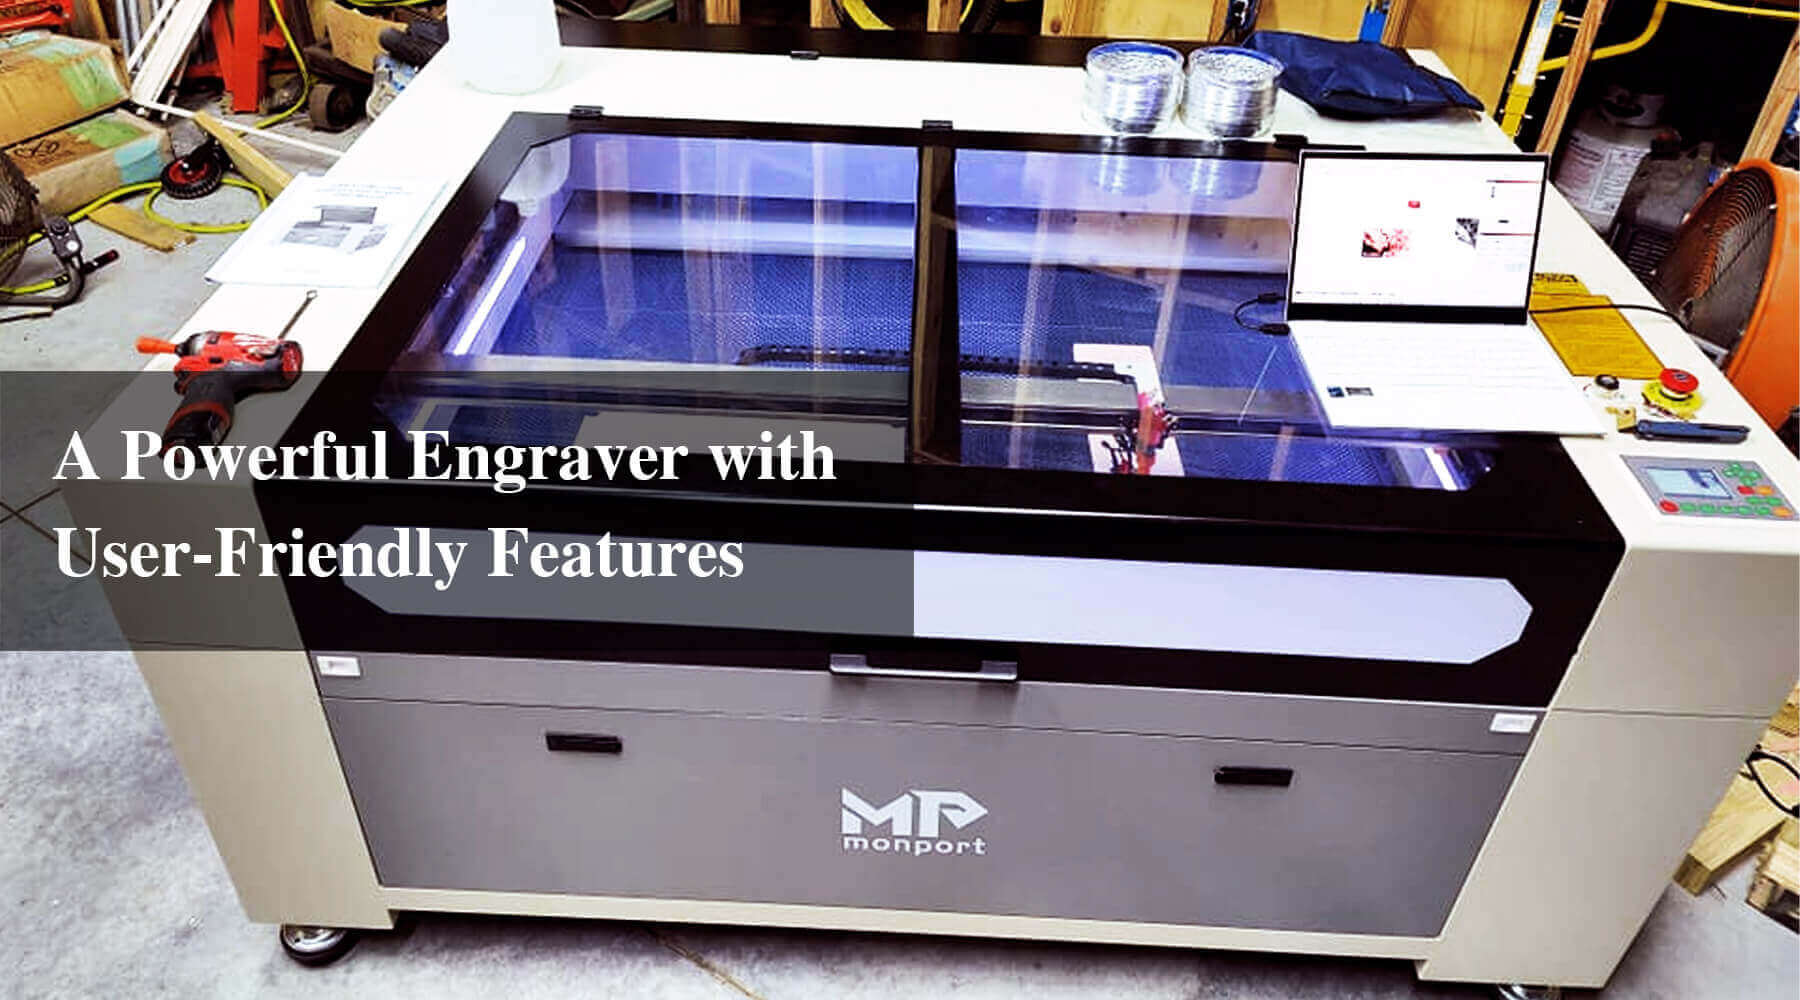 A Powerful Engraver with User-Friendly Features